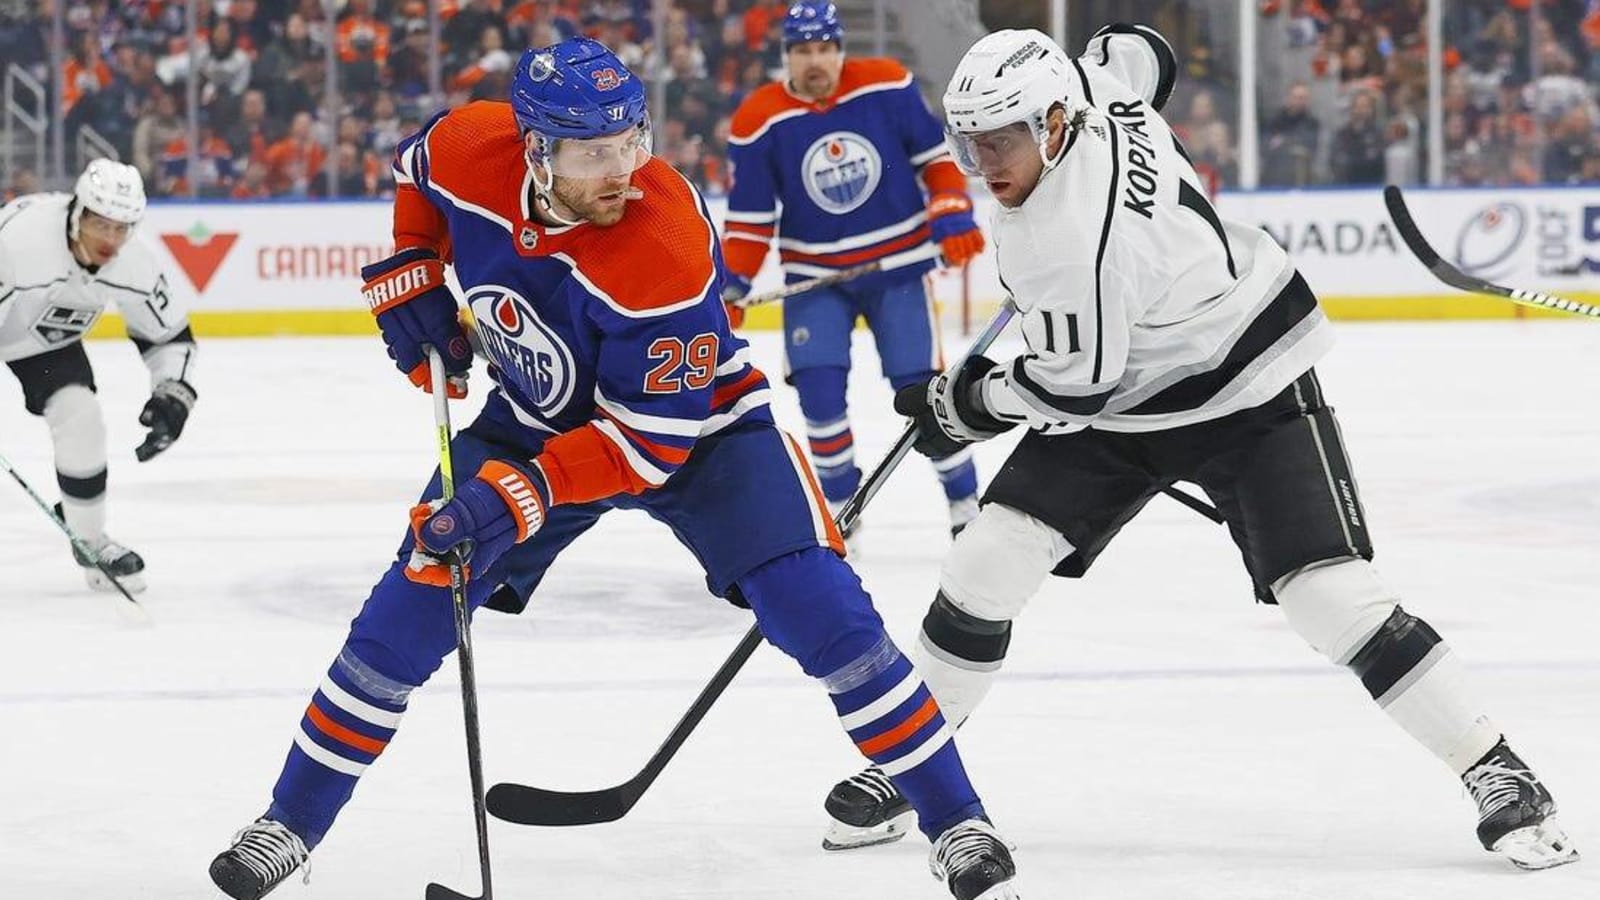 Oilers blank Kings, move into 2nd in division